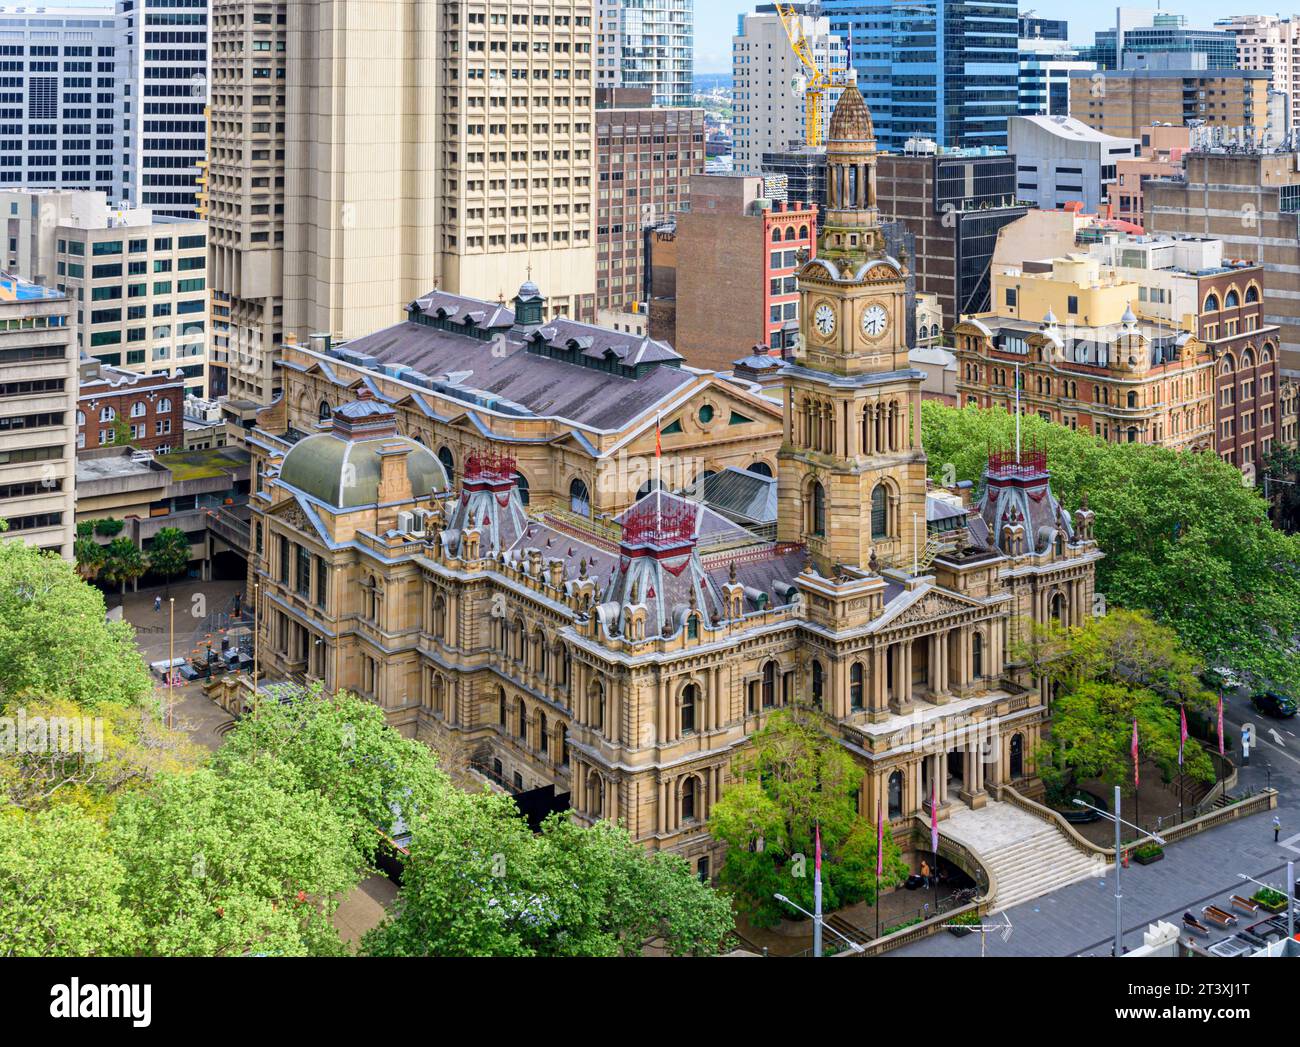 Ornate exterior of the 9th century Sydney Town Hall built in Victorian Second Empire style, George Street, Sydney CBD, New South Wales, Australia Stock Photo